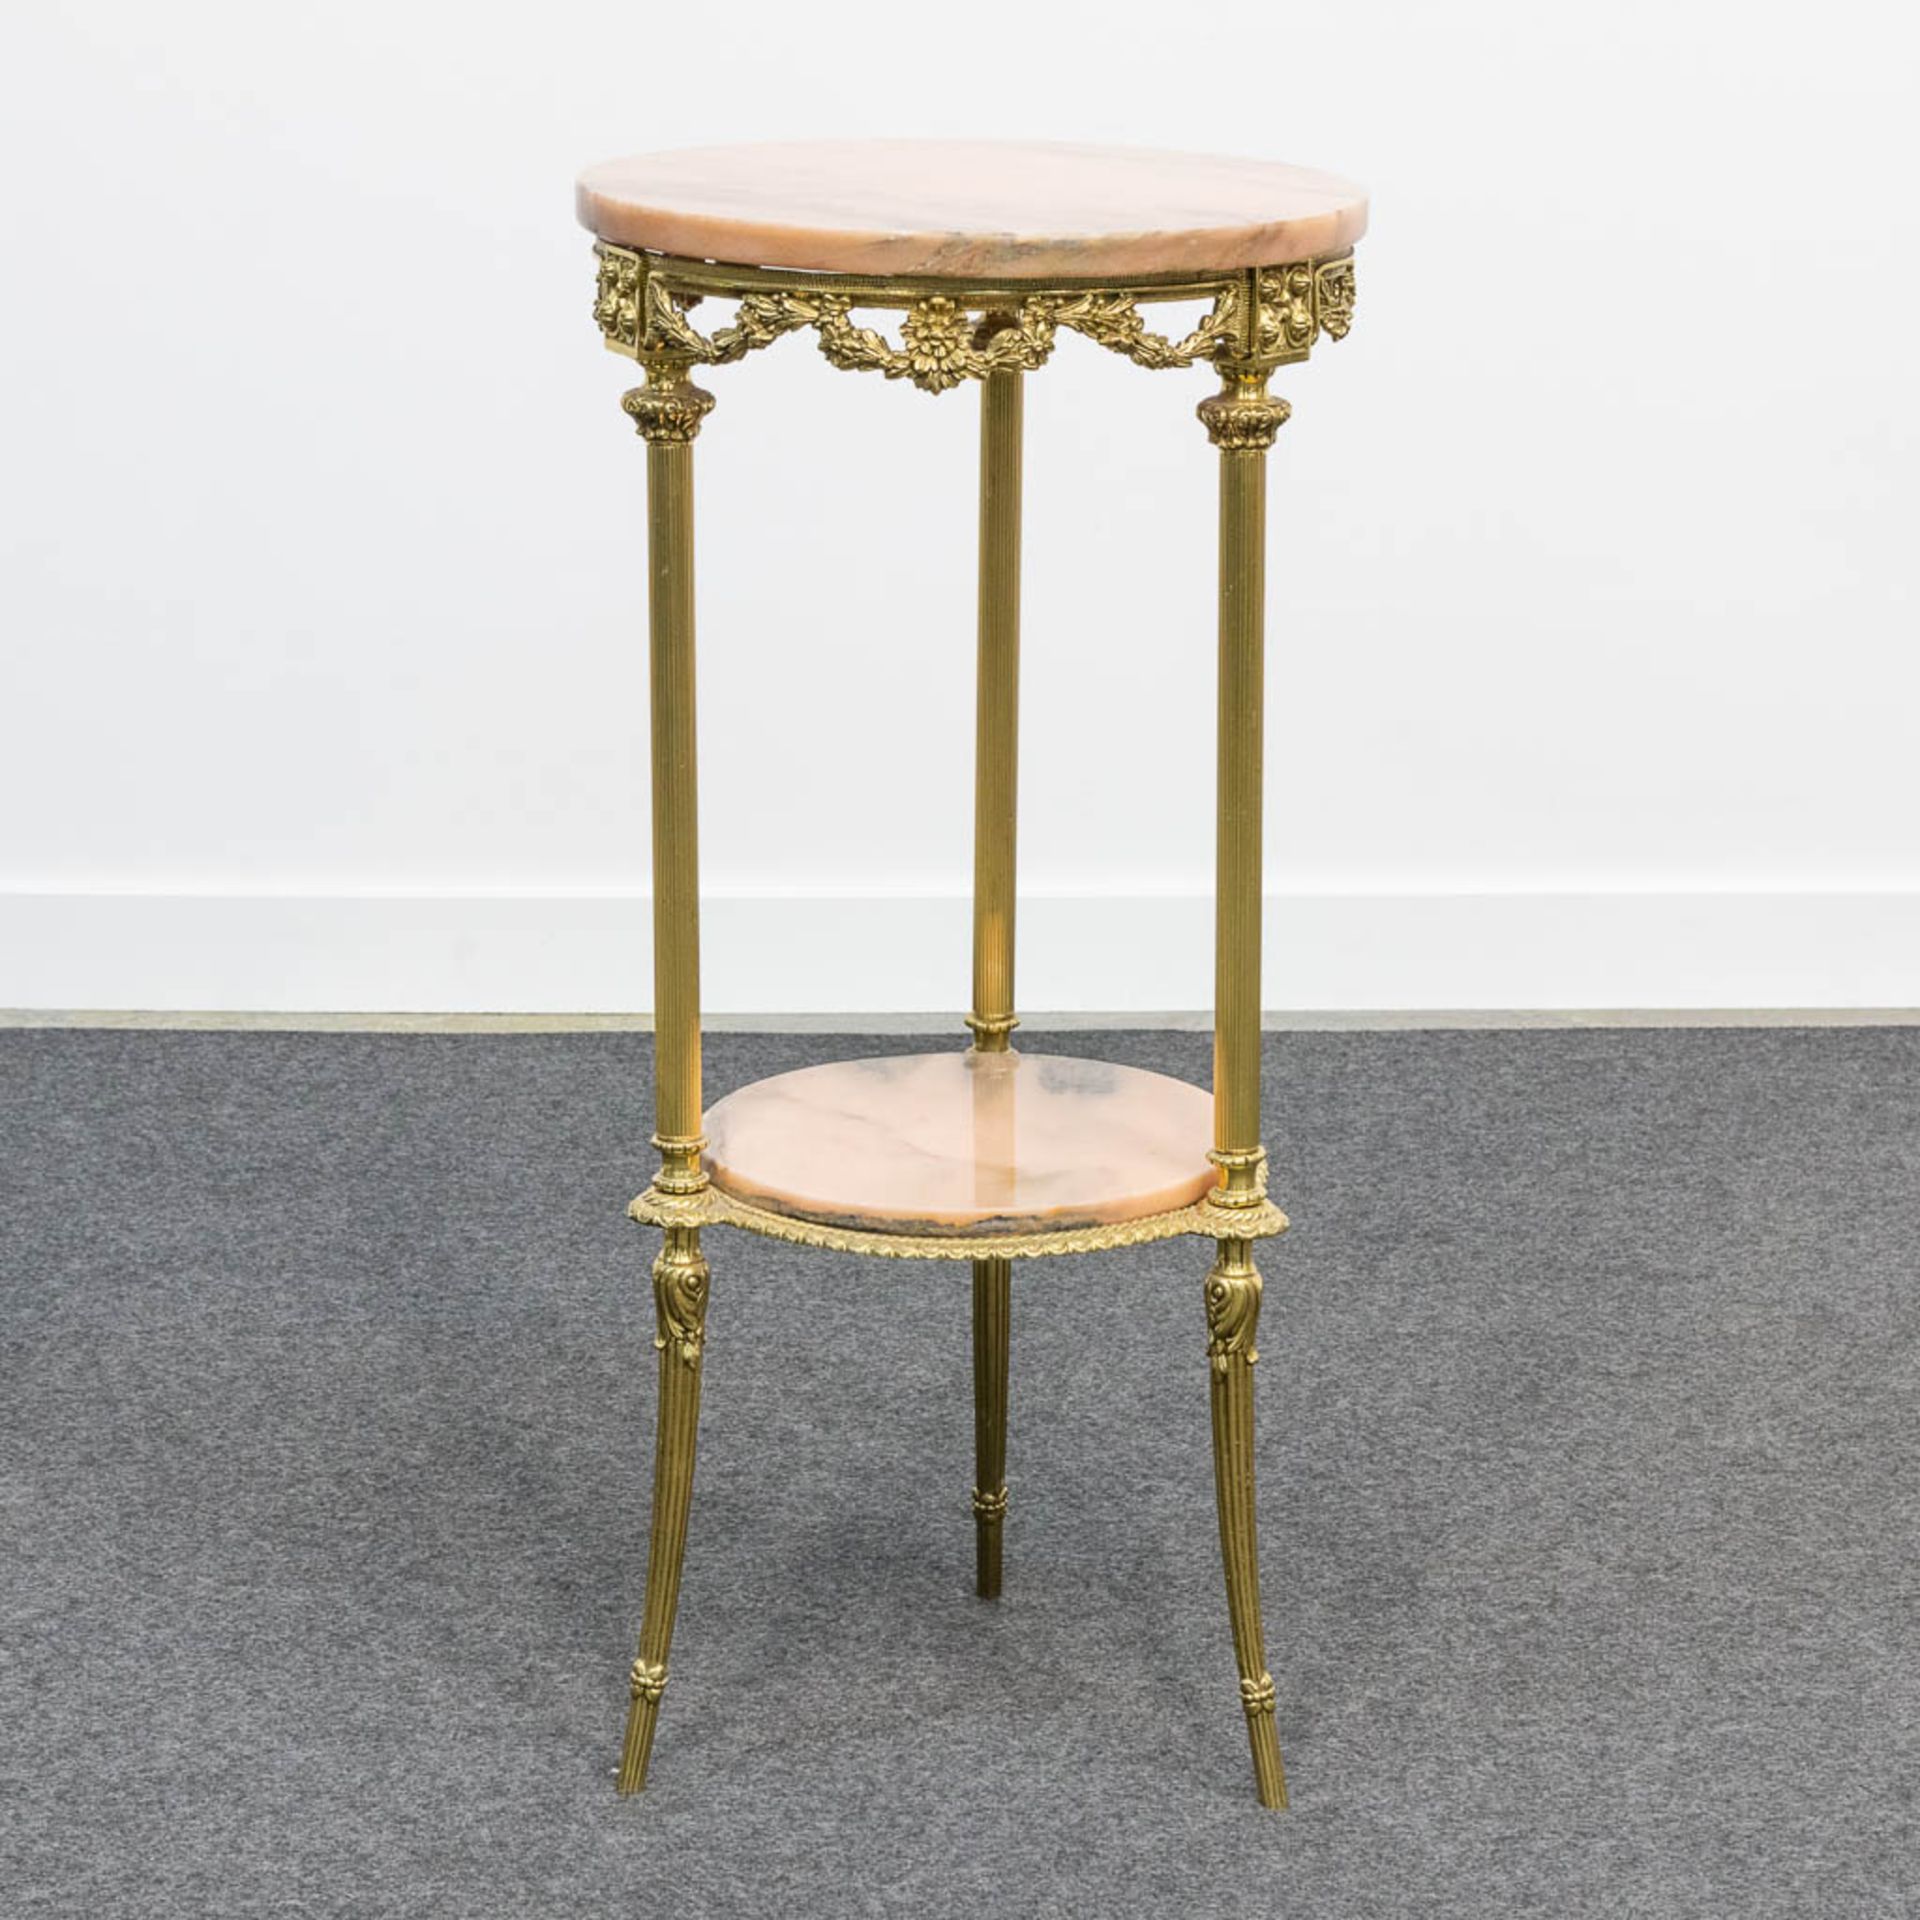 A two-tier side table made of bronze and with pink marble tops. (72 x 34,5 cm) - Bild 3 aus 12